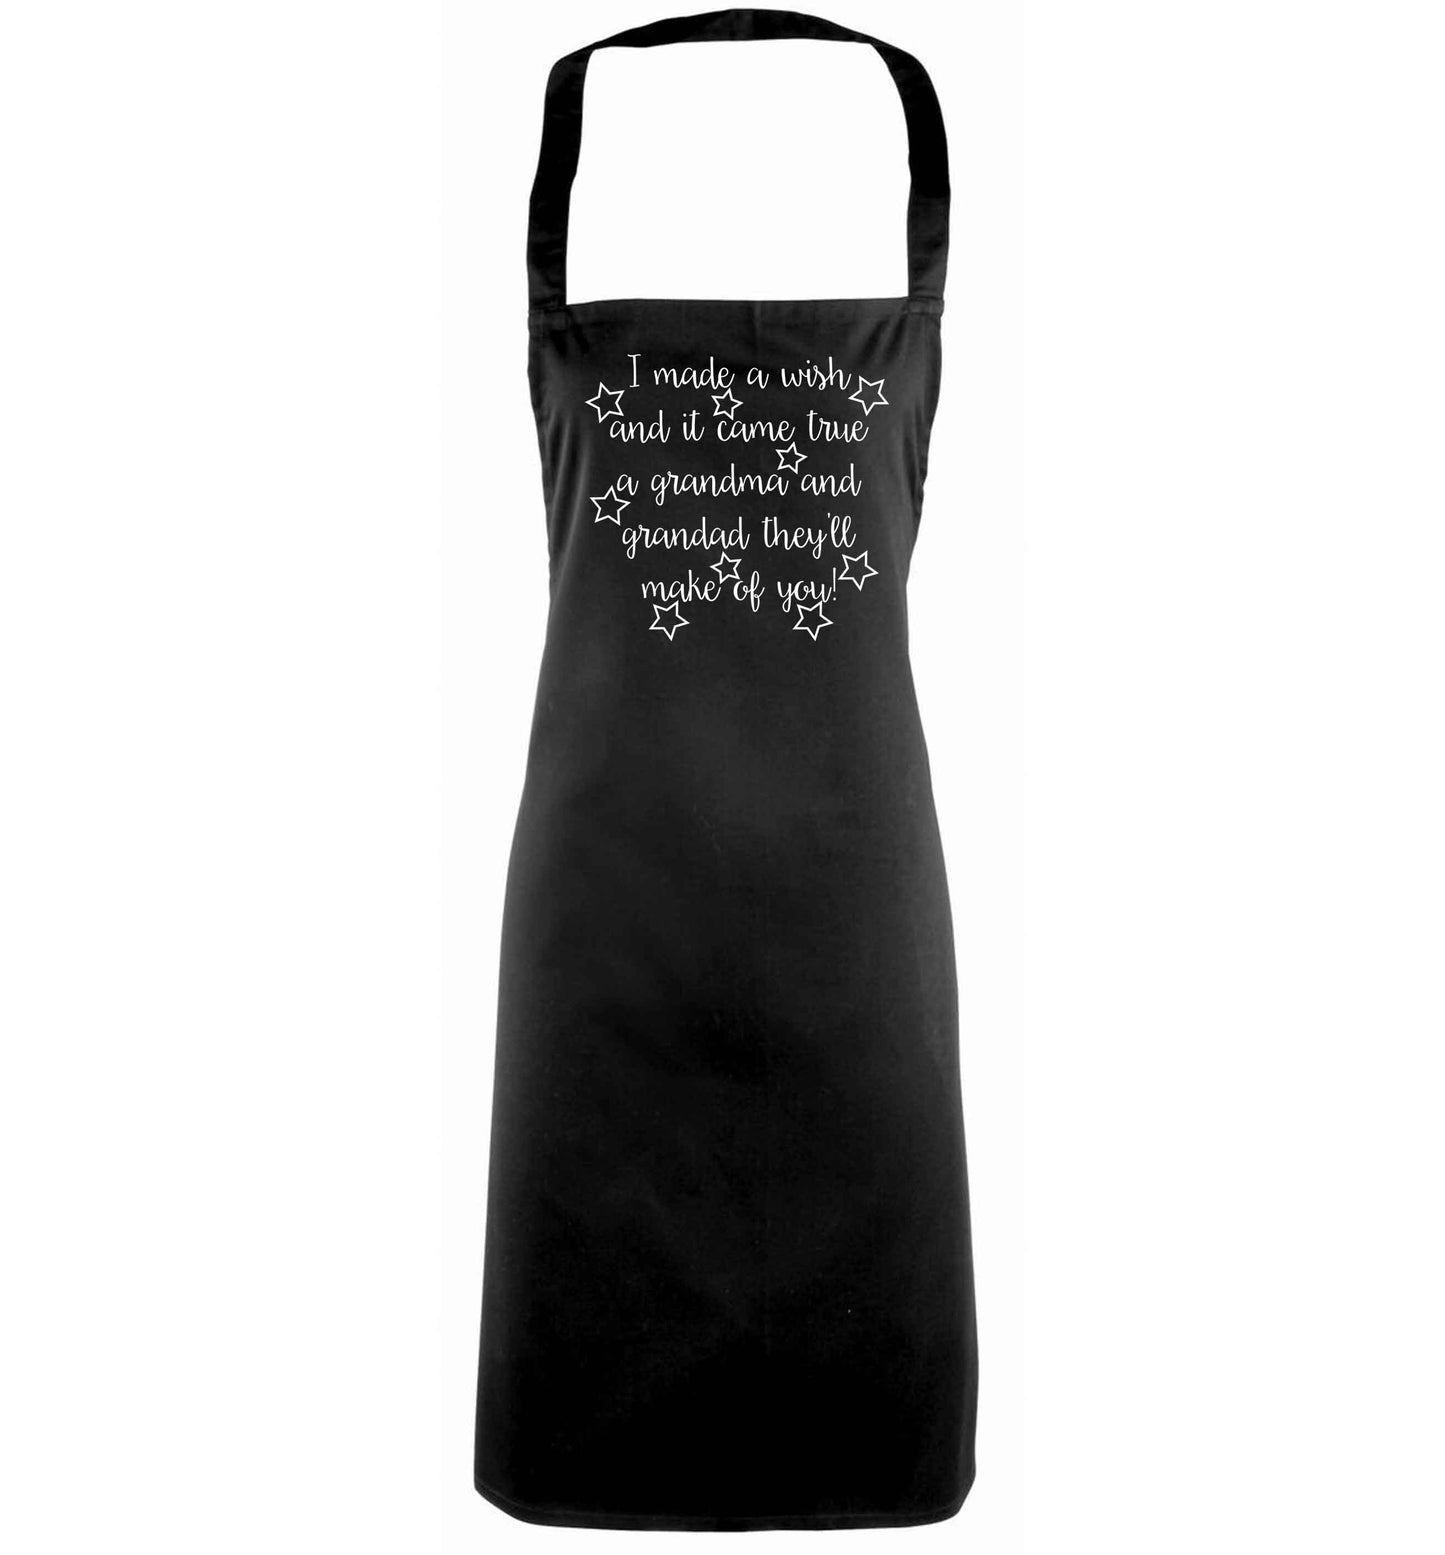 I made a wish and it came true a grandma and grandad they'll make of you! black apron